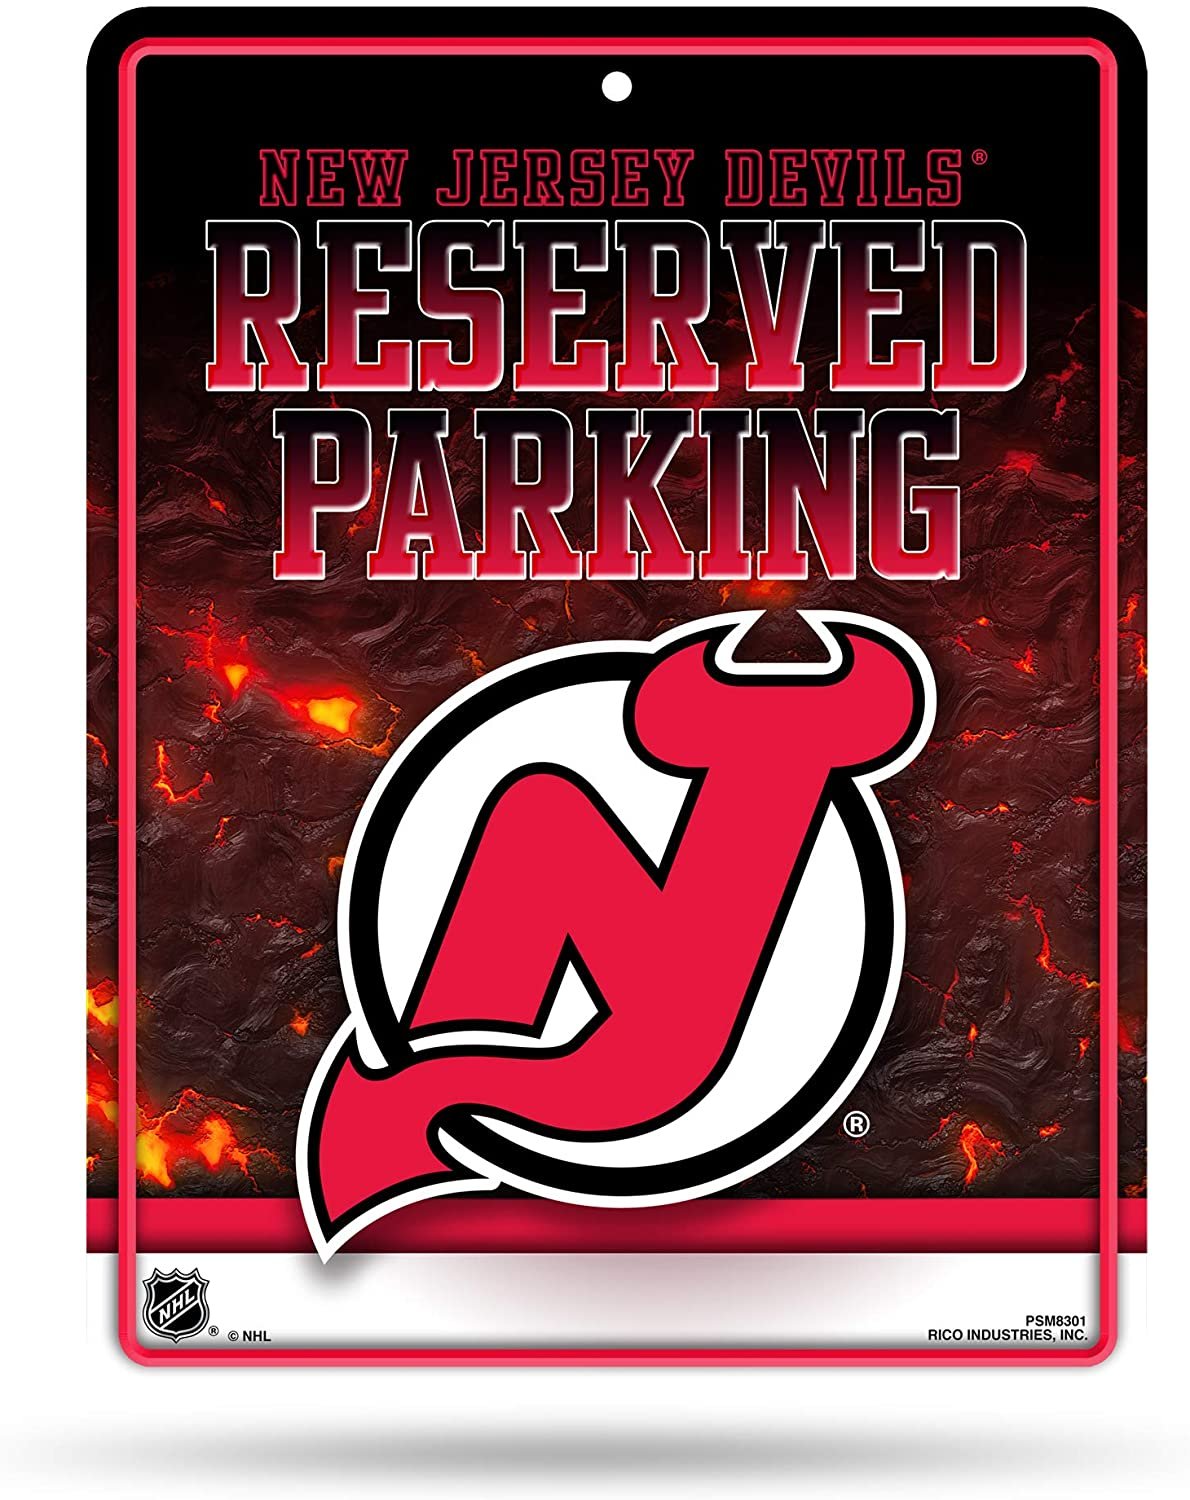 New Jersey Devils 8-Inch by 11-Inch Metal Parking Sign Décor